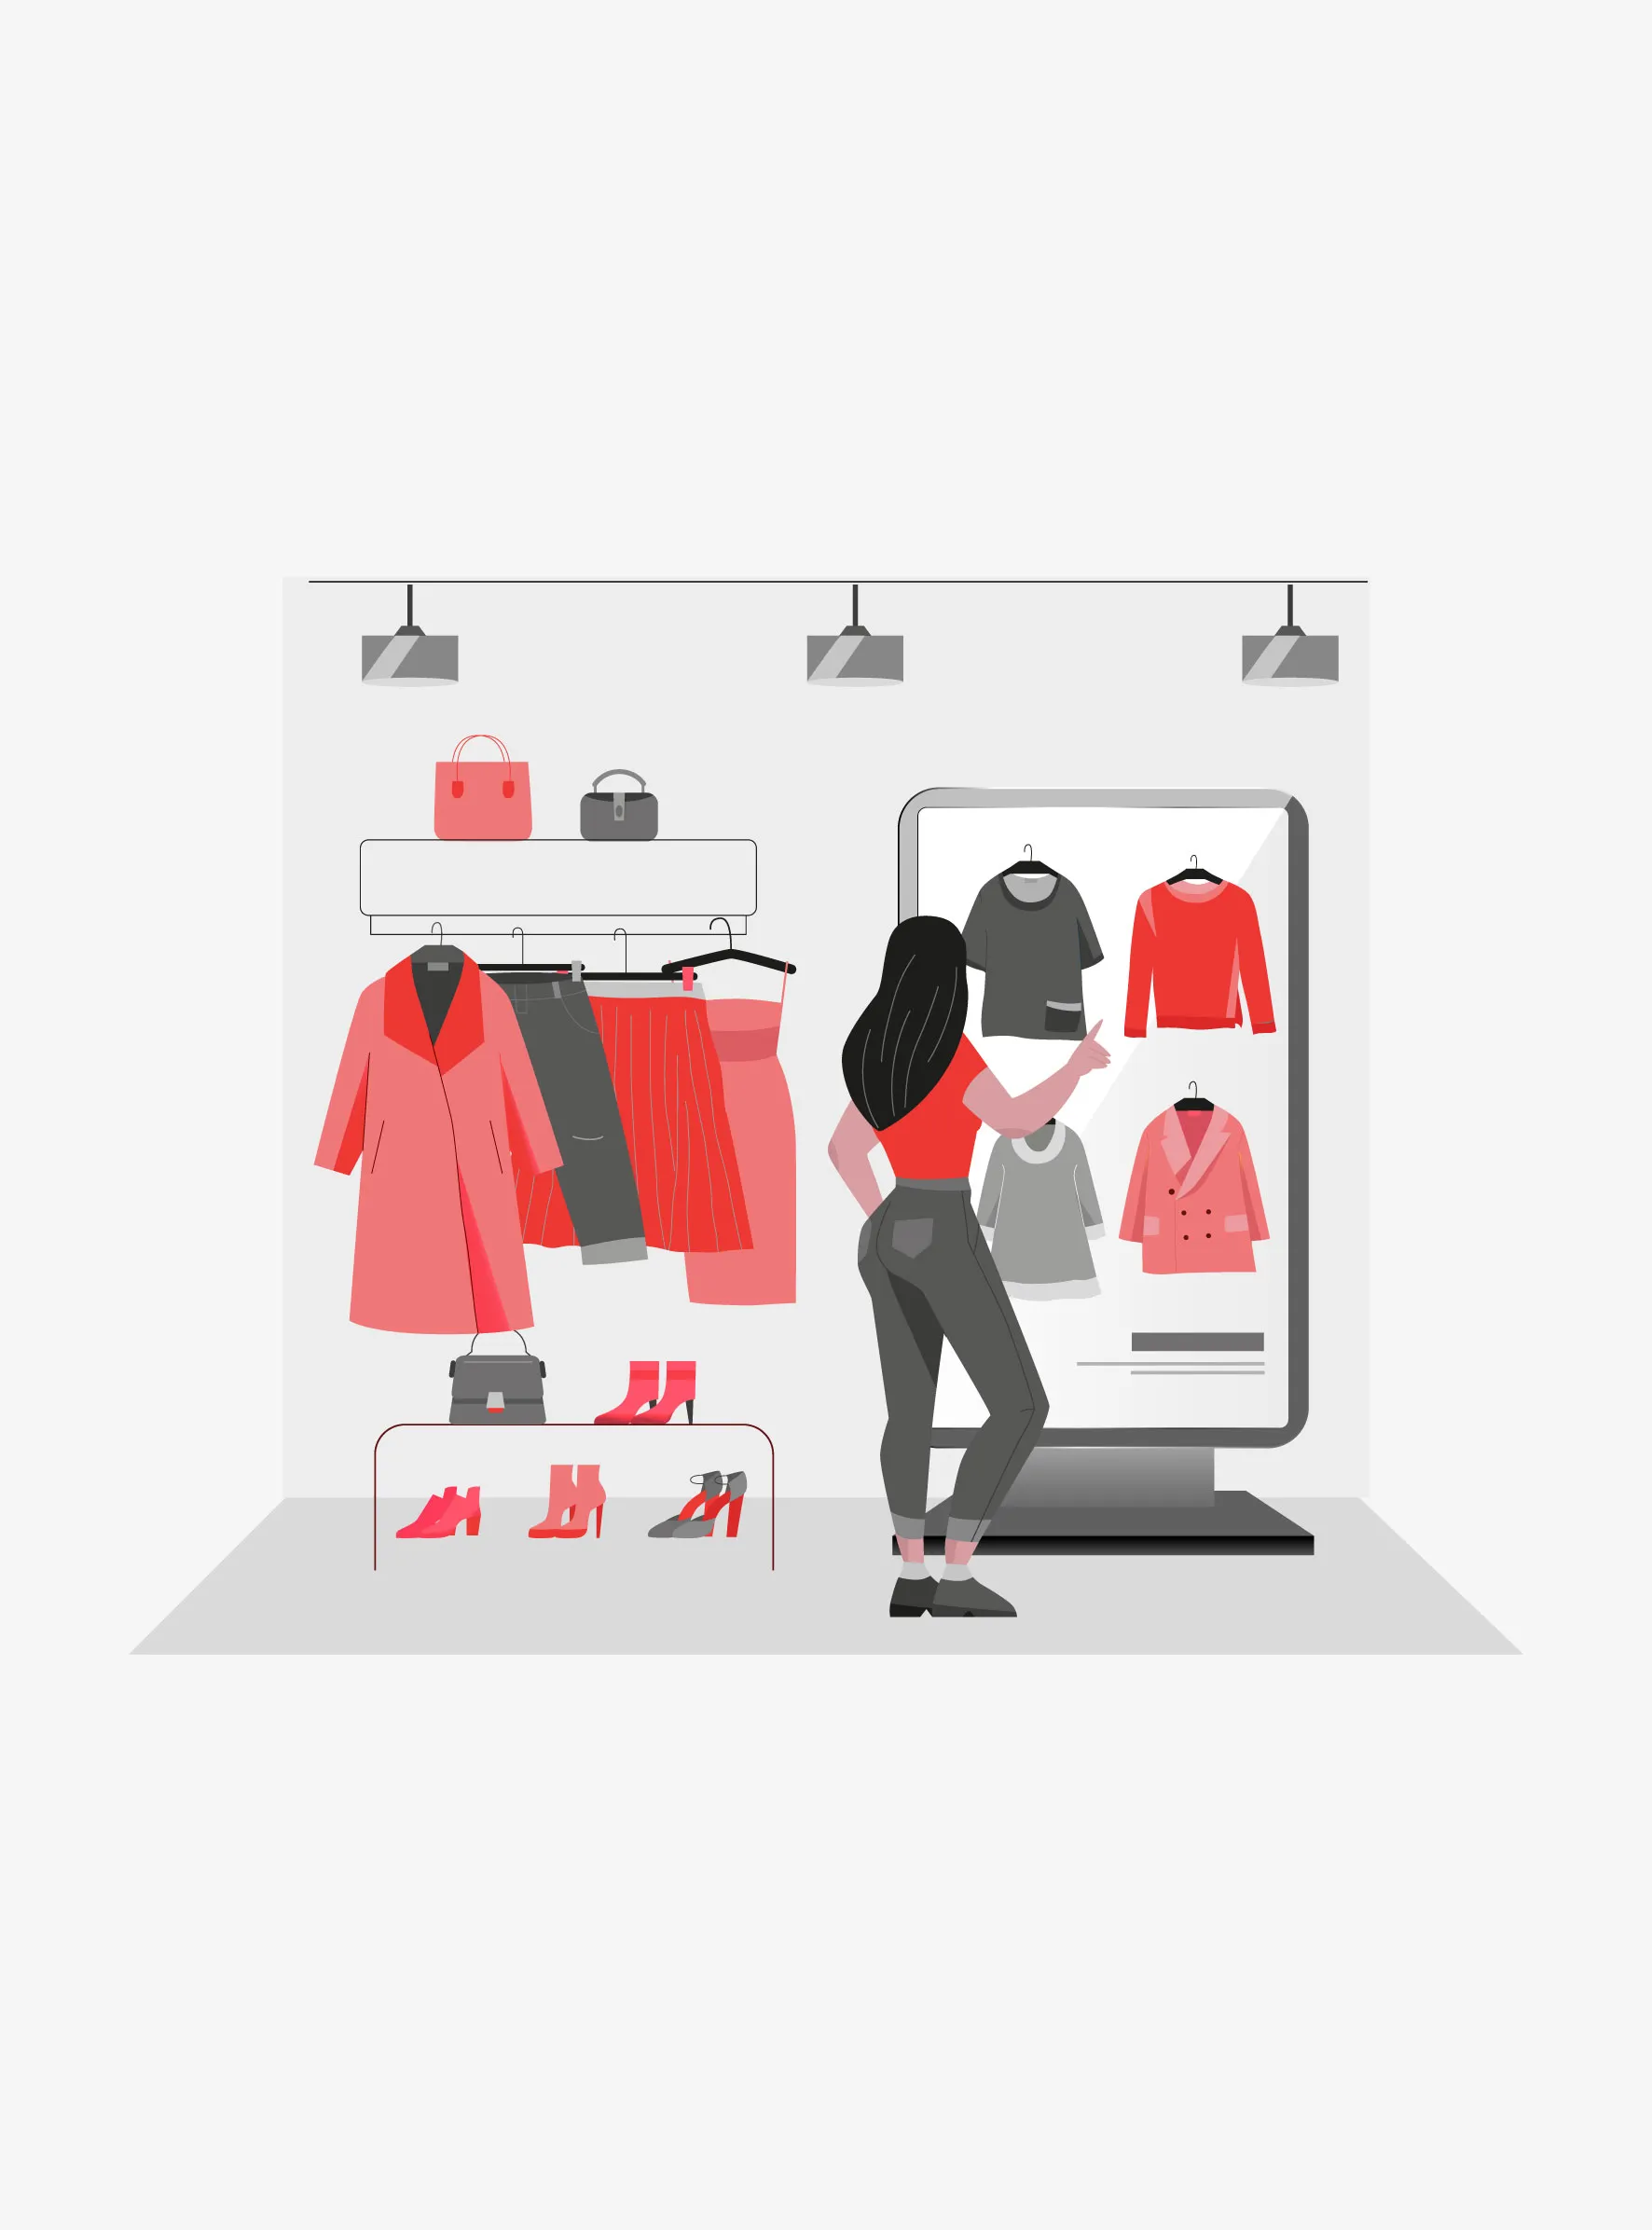 In-store digitalization: the birth of a new era for business models